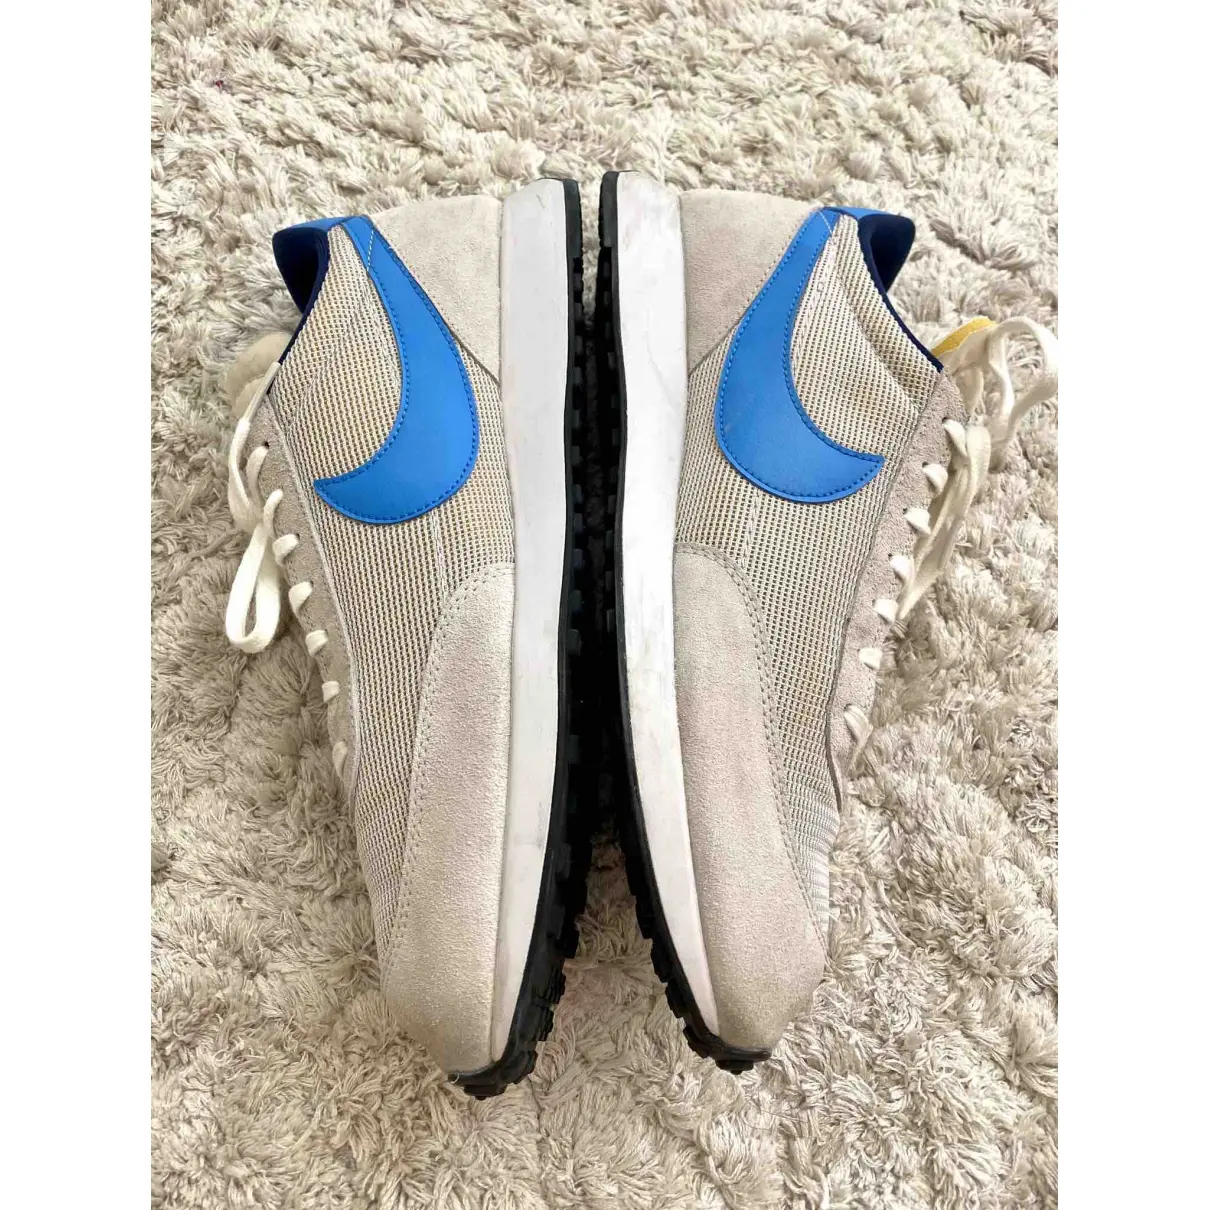 Buy Nike Cloth low trainers online